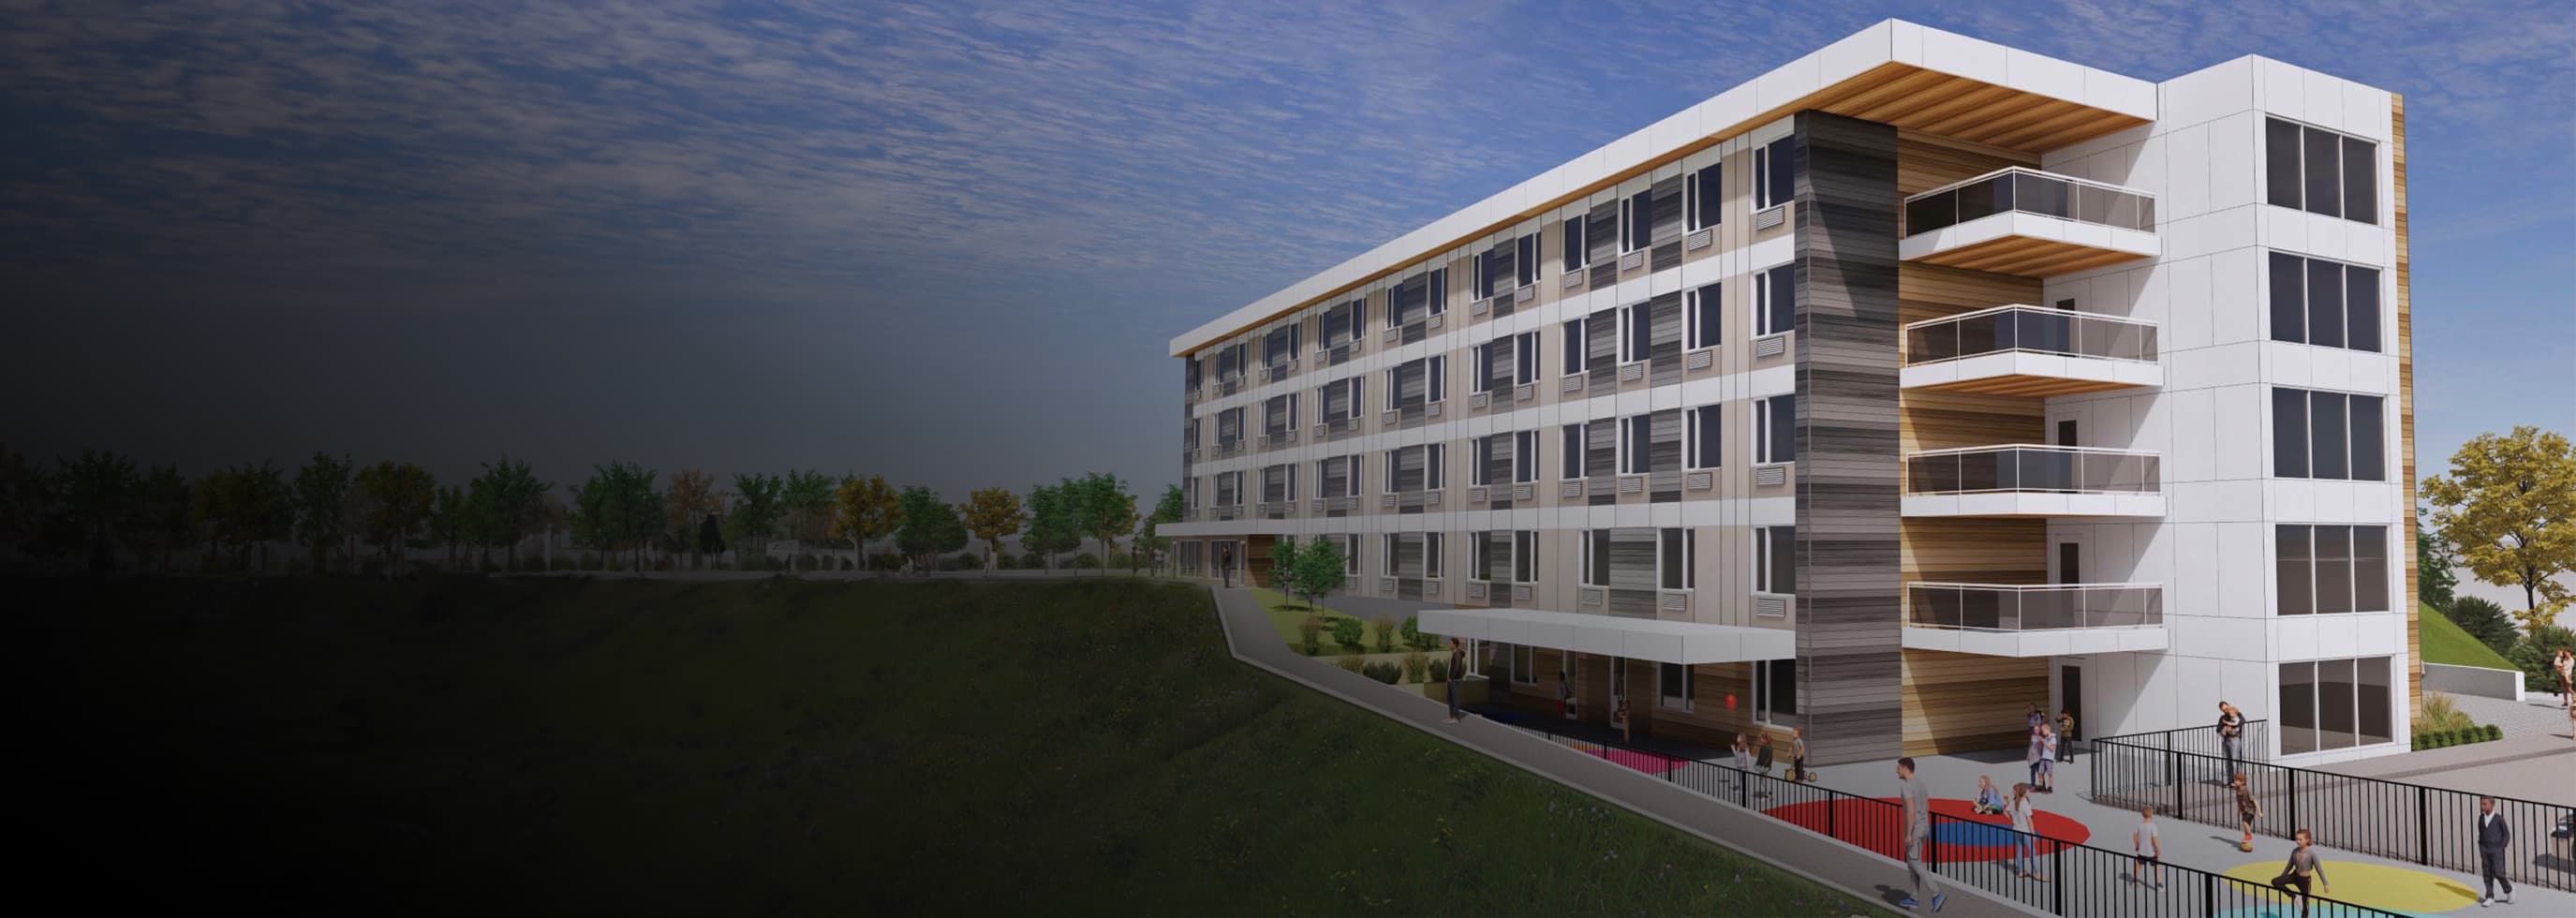 rendering of the exterior view of the new student housing residence in Vernon campus